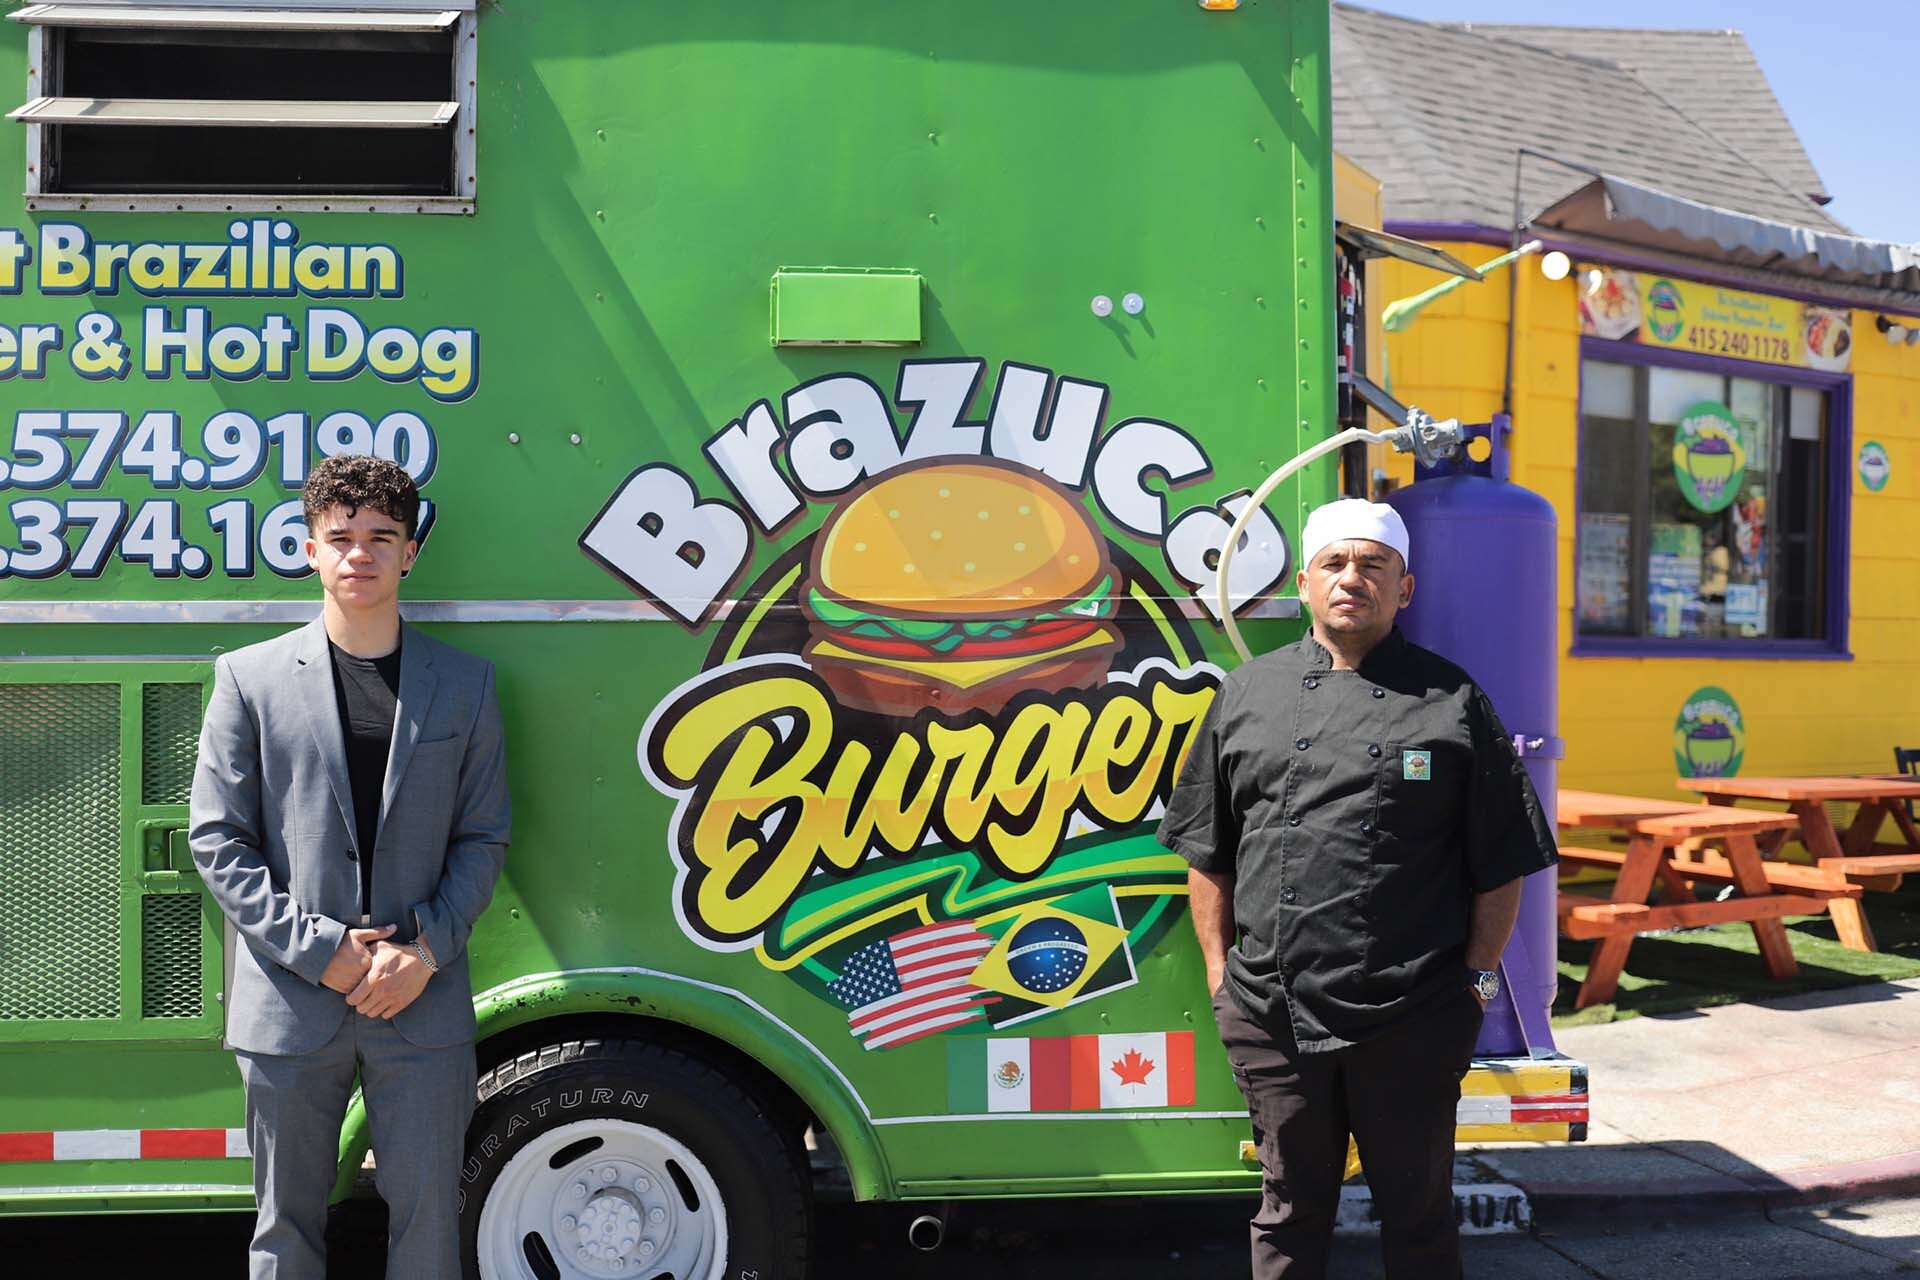 a 21-year-old man and his father stand in front of their food truck, which reads "Brazuca Burger"